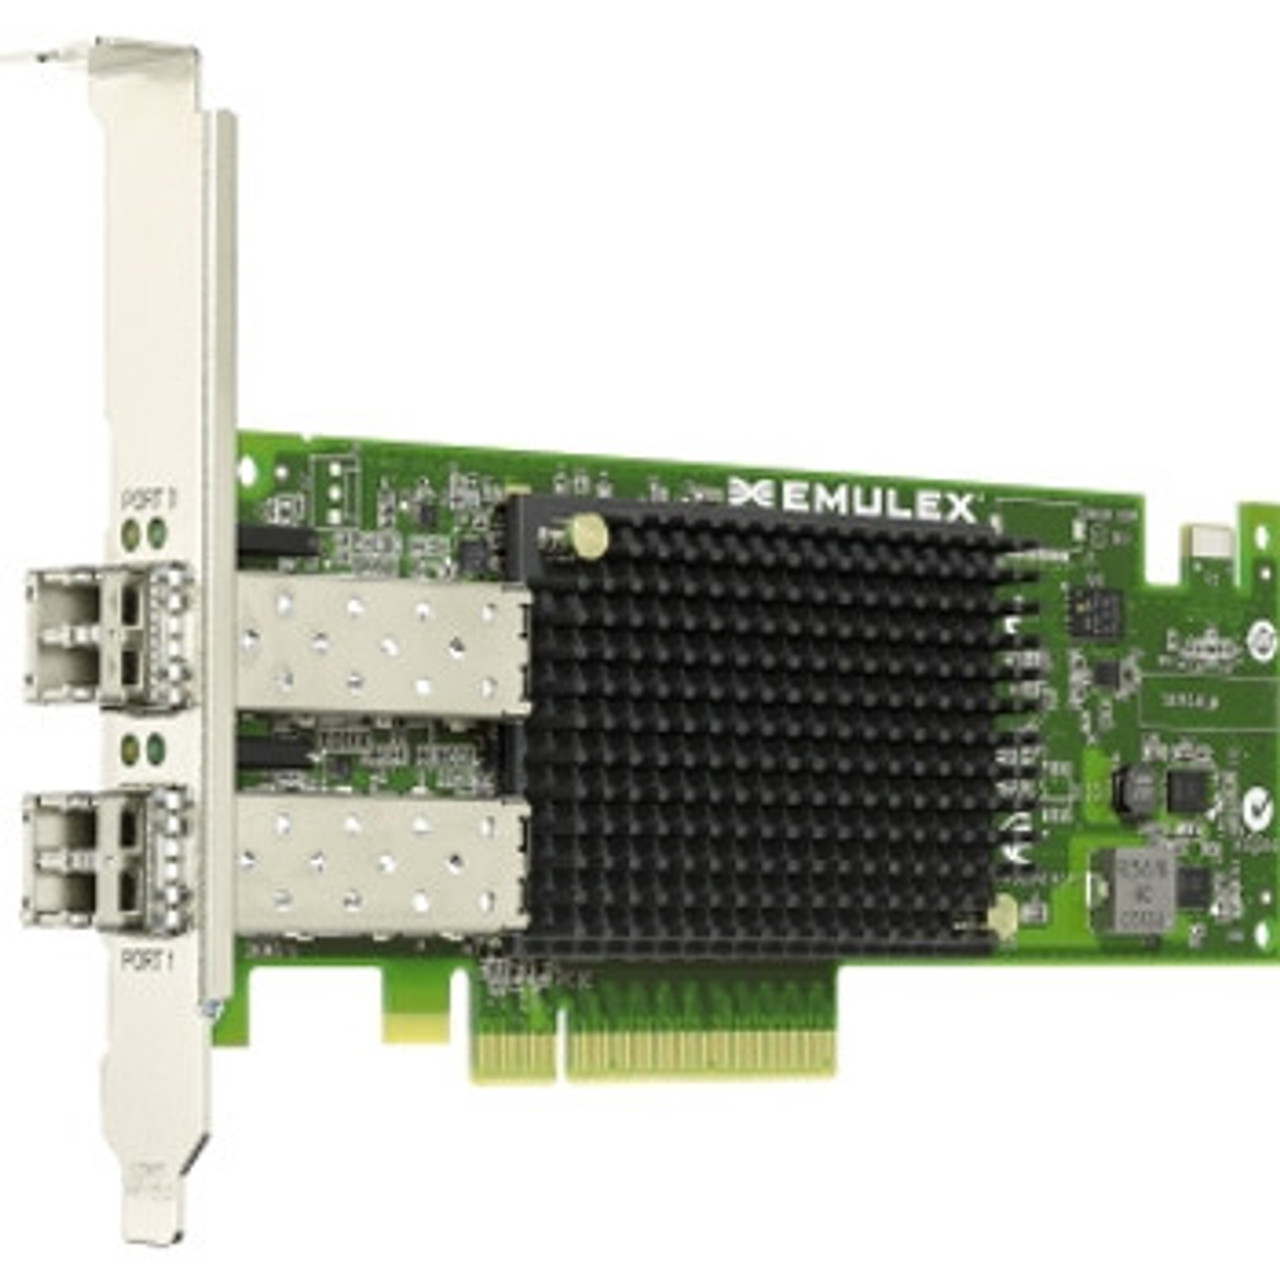 90Y645601 | Ibm | Dual-Ports Sfp+ 10Gbps Gigabit Ethernet Embedded Network Adapter Vfa Iii X By Emulex For System